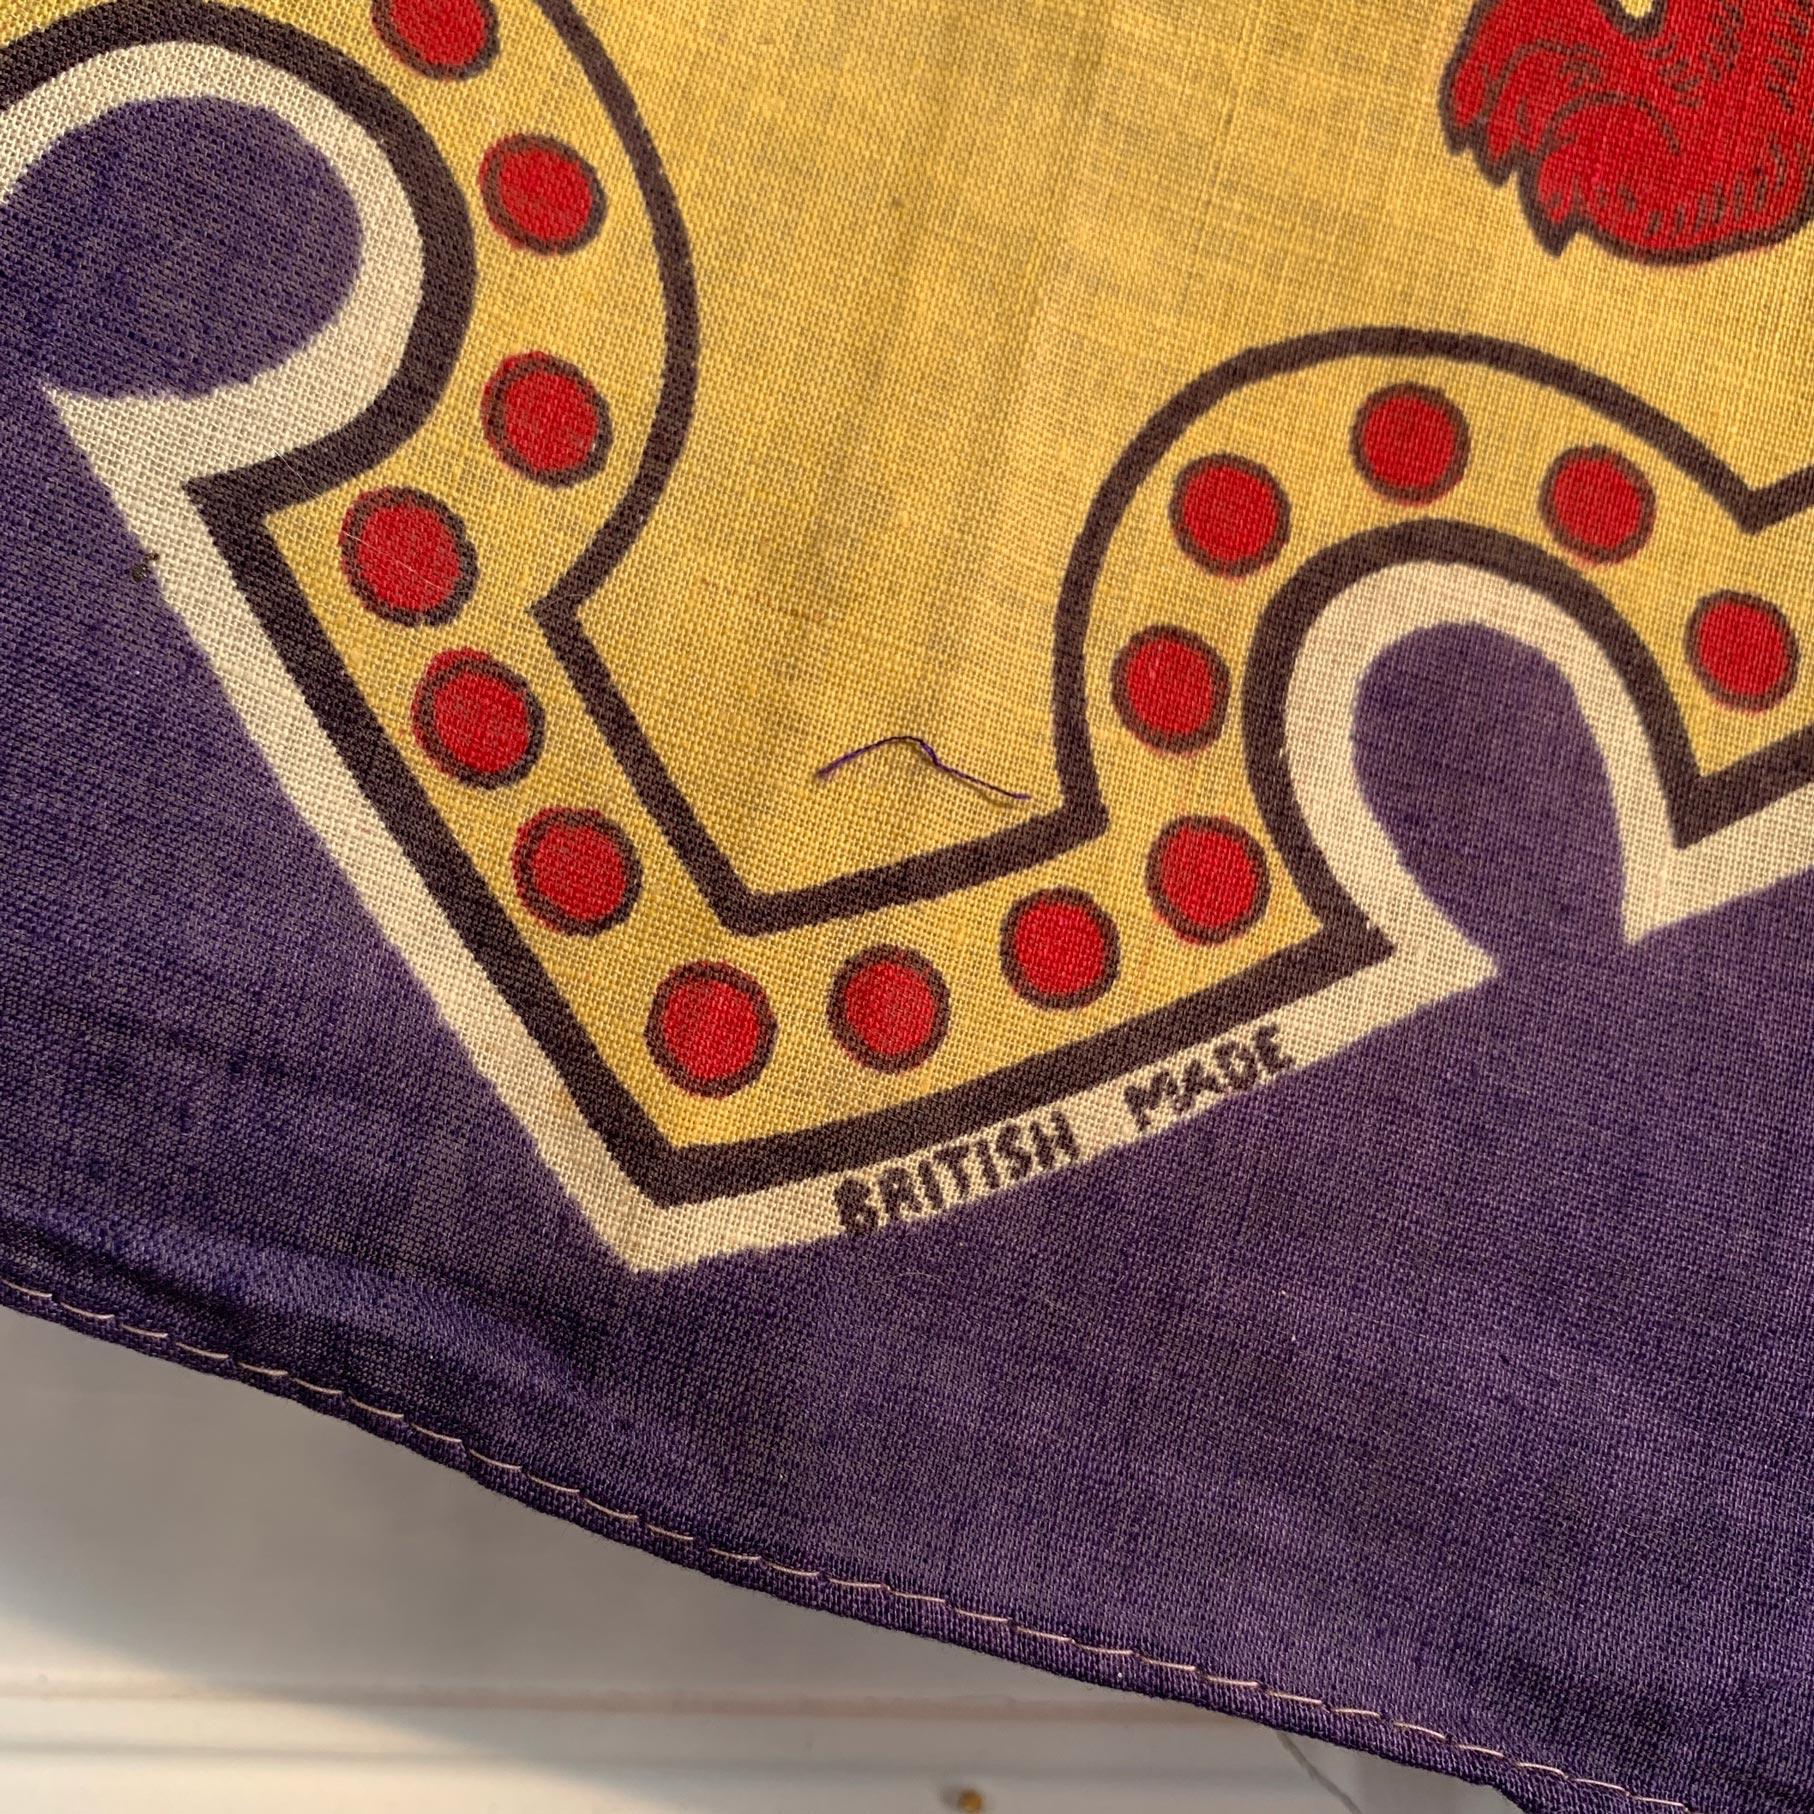 King George VI Coronation Flag 1937 In Good Condition For Sale In Hastings, GB